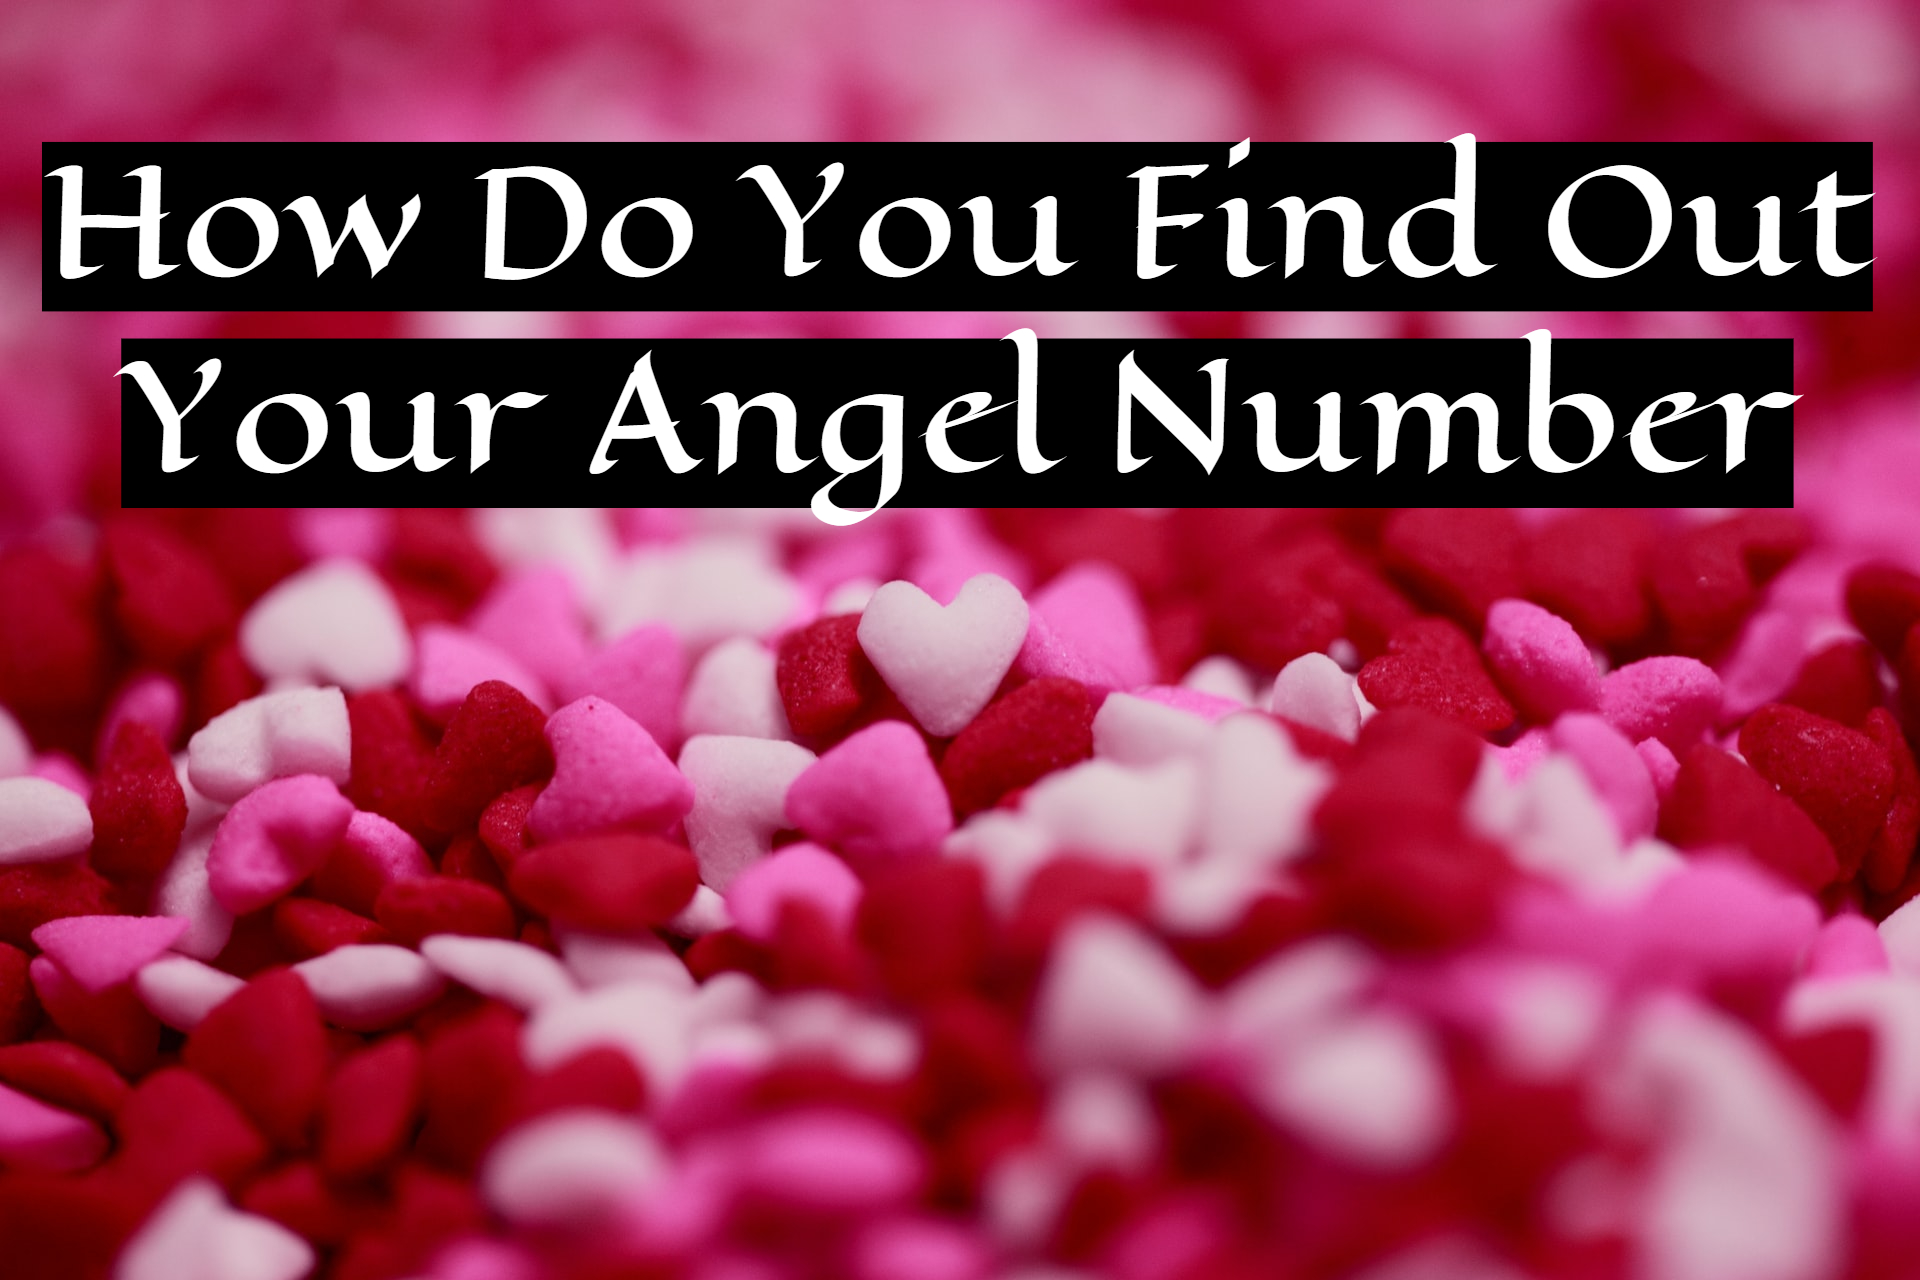 How Do You Find Out Your Angel Number - Complete Guide